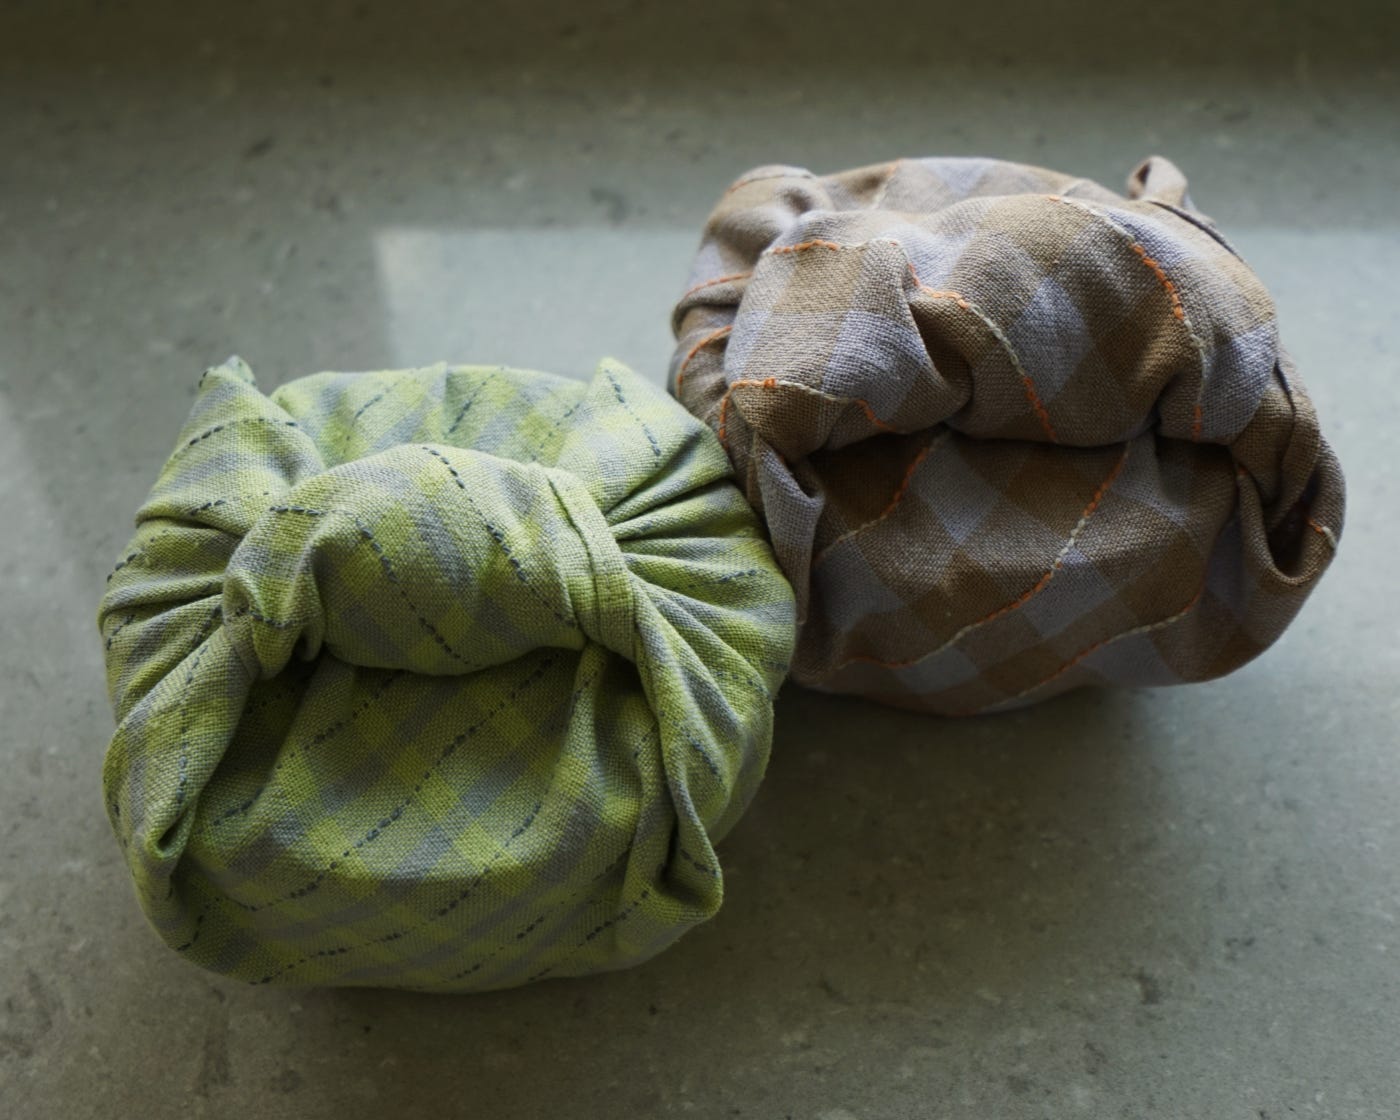 Two containers wrapped in cloth sit next to each other on a countertop. 